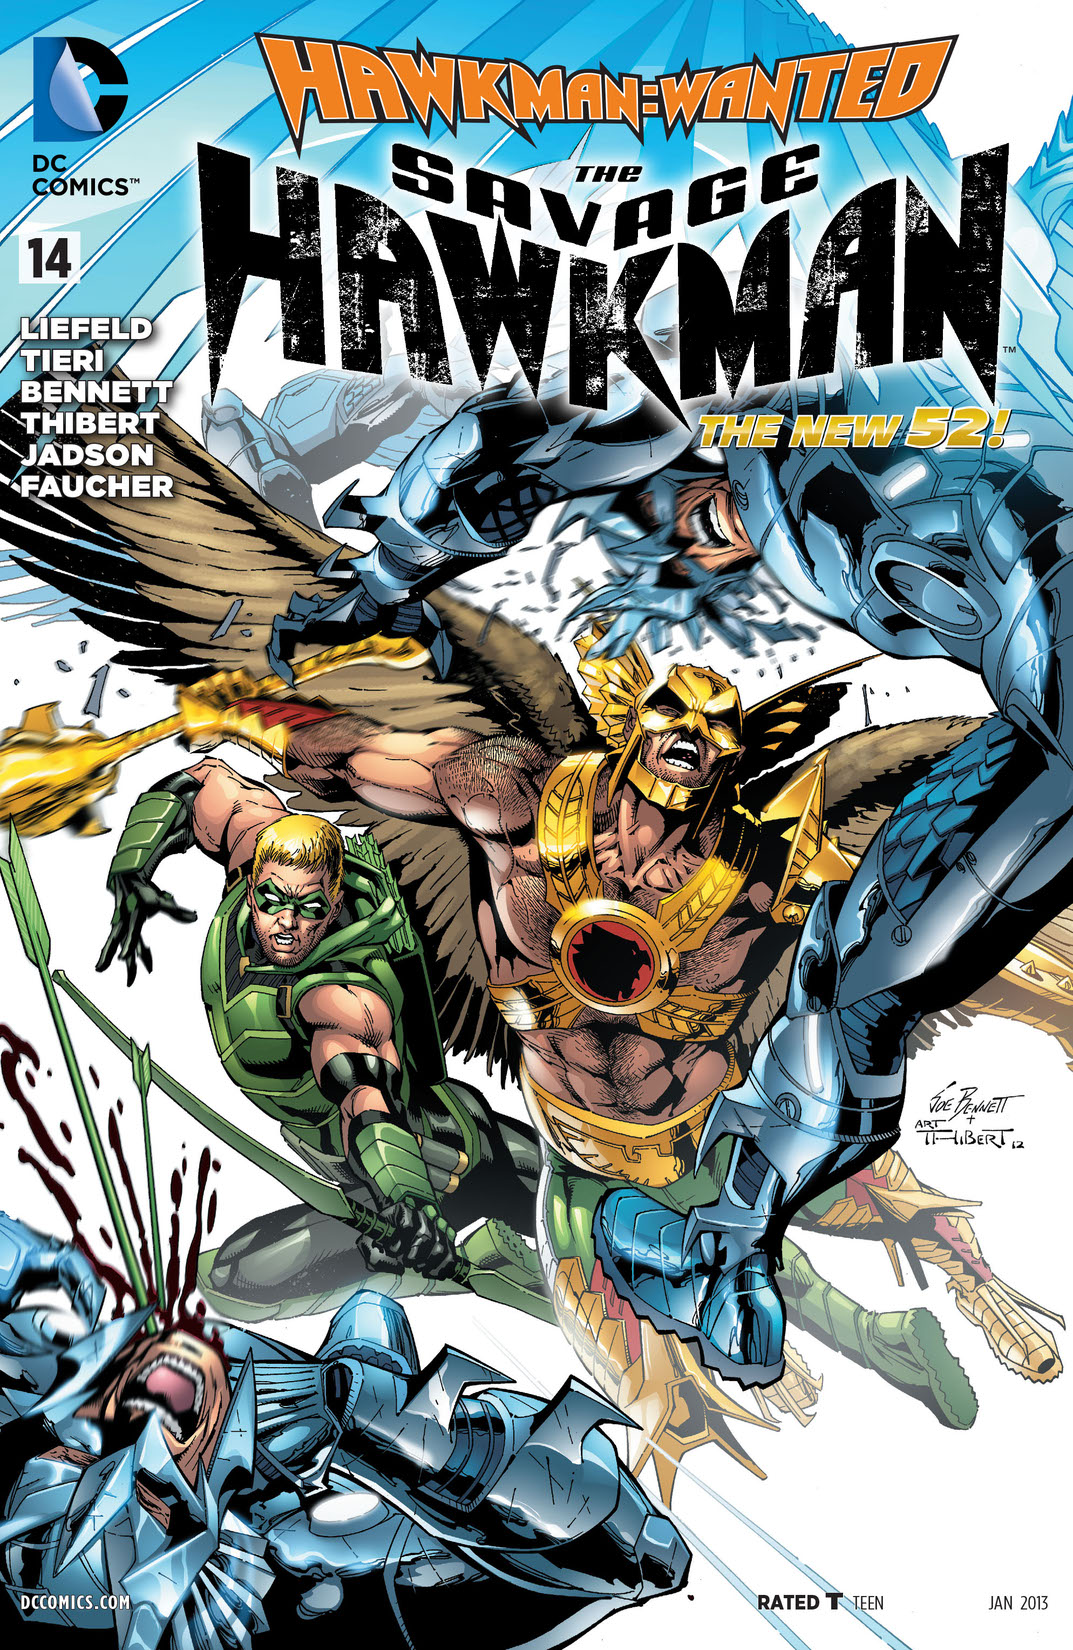 The Savage Hawkman #14 preview images